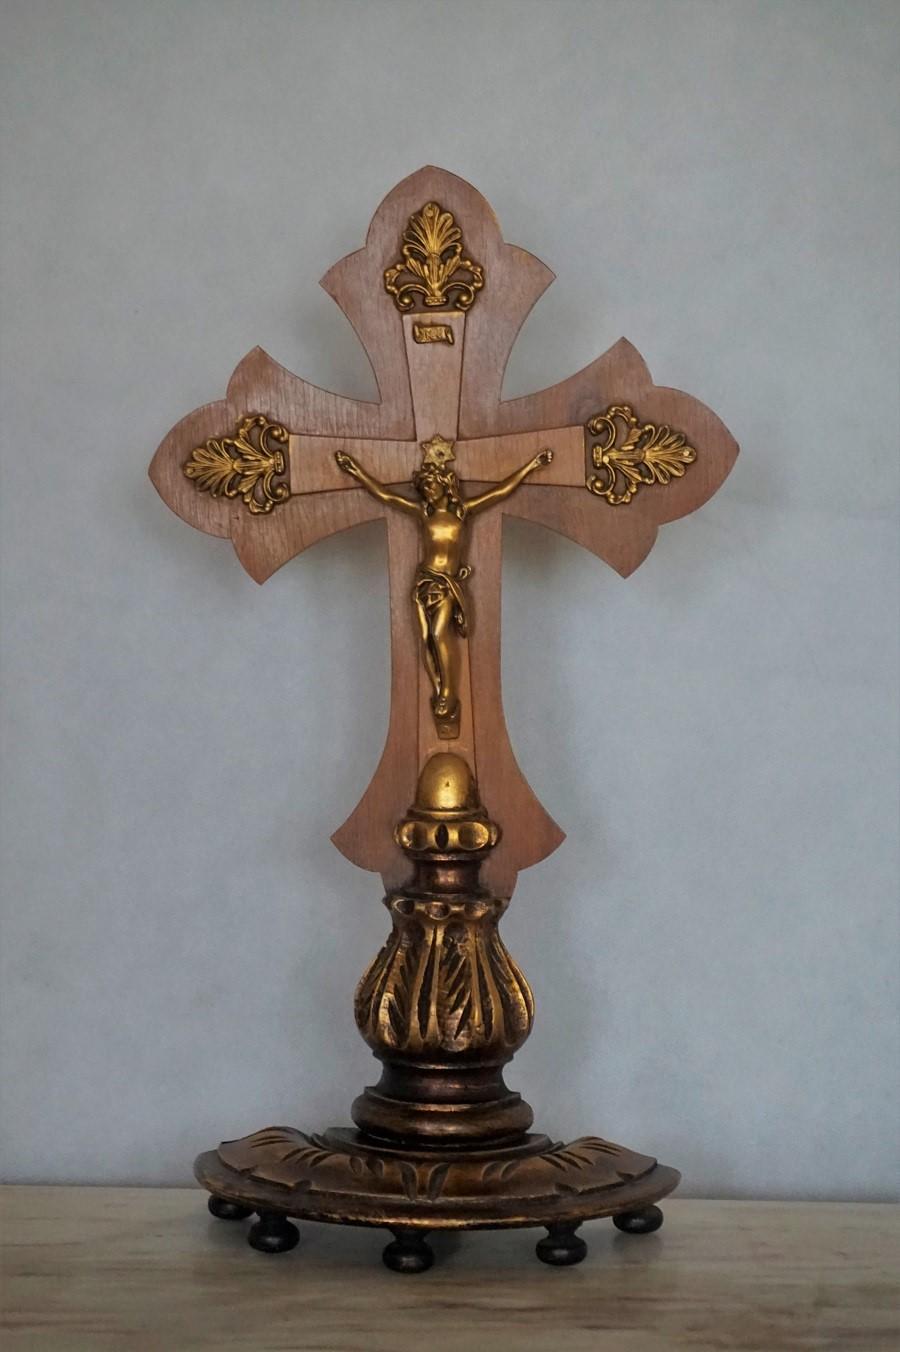 Vintage handcrafted wooden stand cross with gilt bronze Christ and ornaments on a beautiful carved wooden base, Portugal, 1930-1939.
Measures: Height 19.75